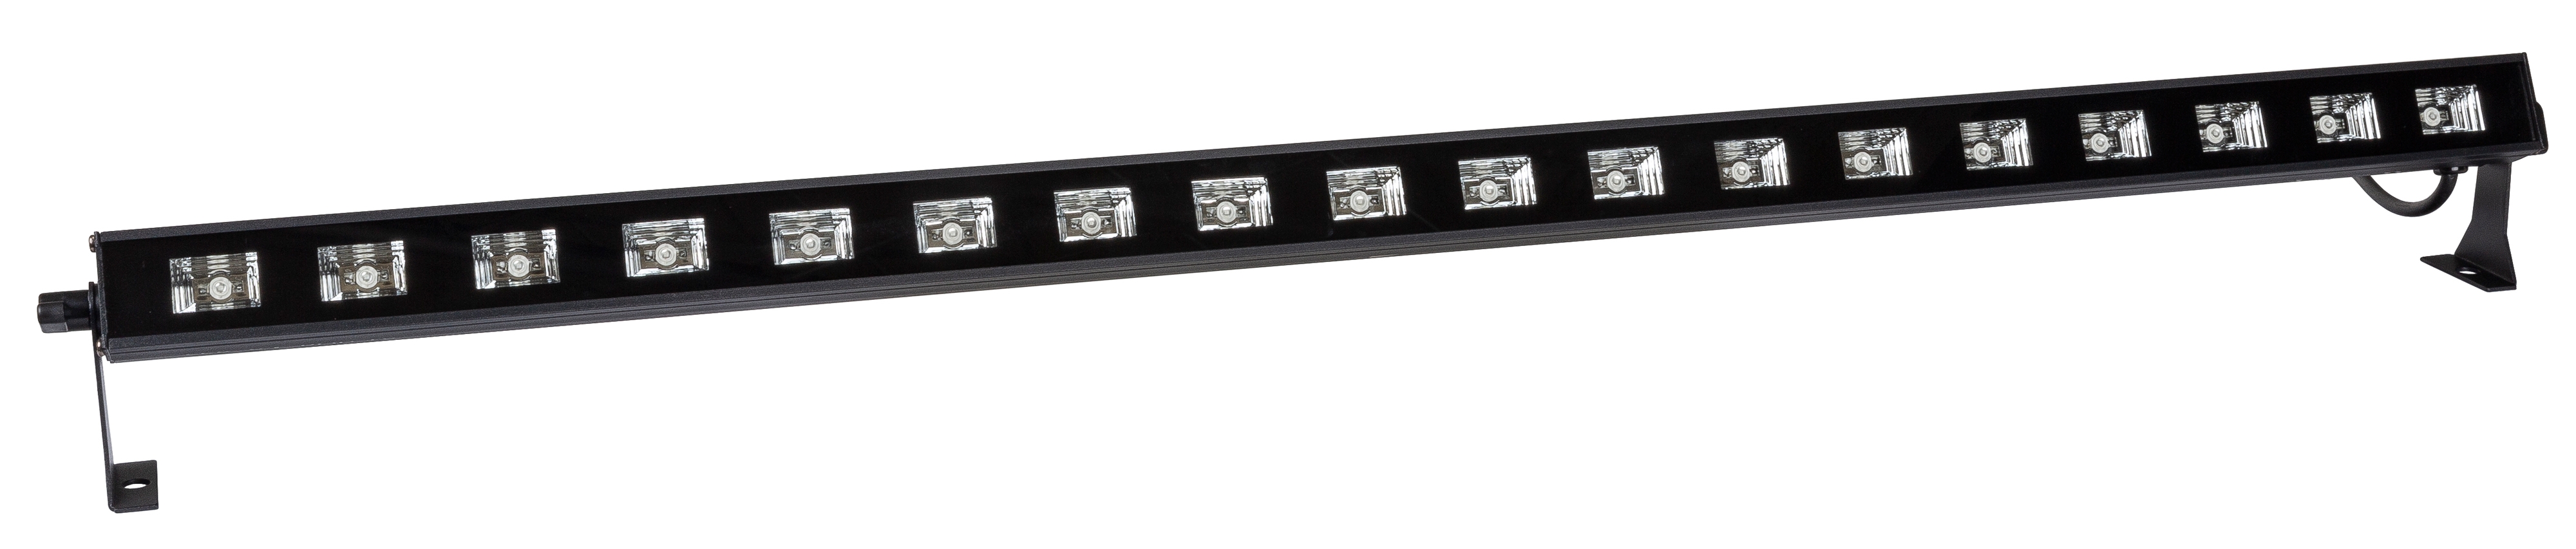 A compact 18x 3W LED-based black light effect for all your parties